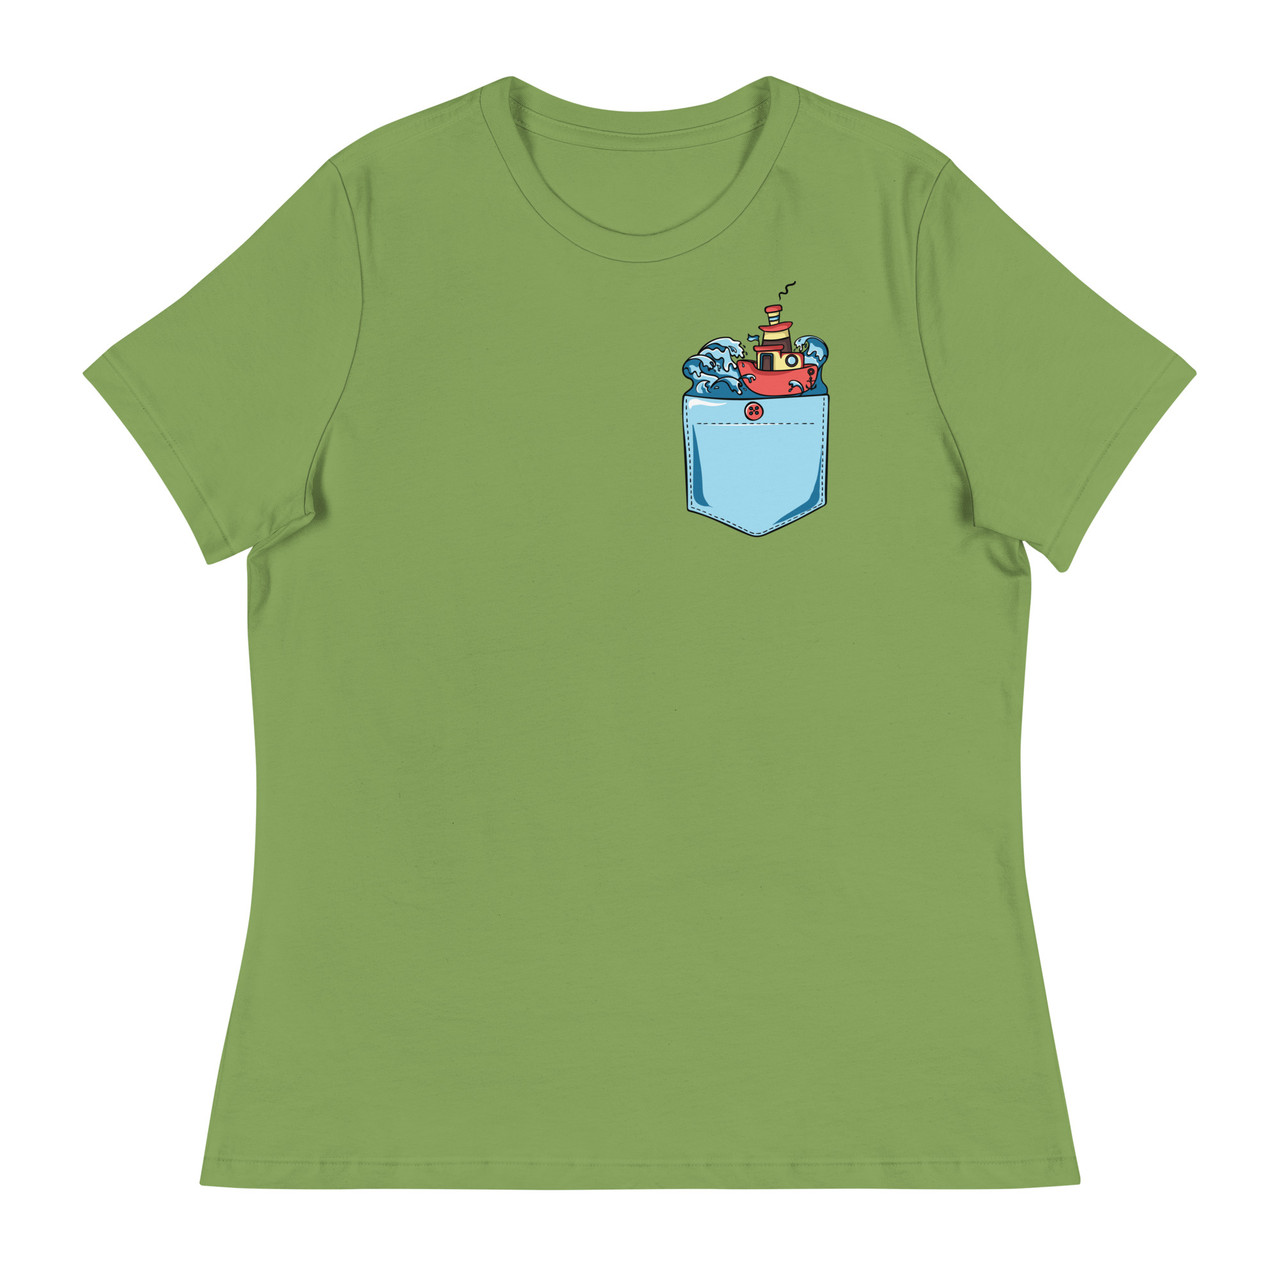 Angry Waves Pocket Women's Relaxed T-Shirt - Bella + Canvas 6400 